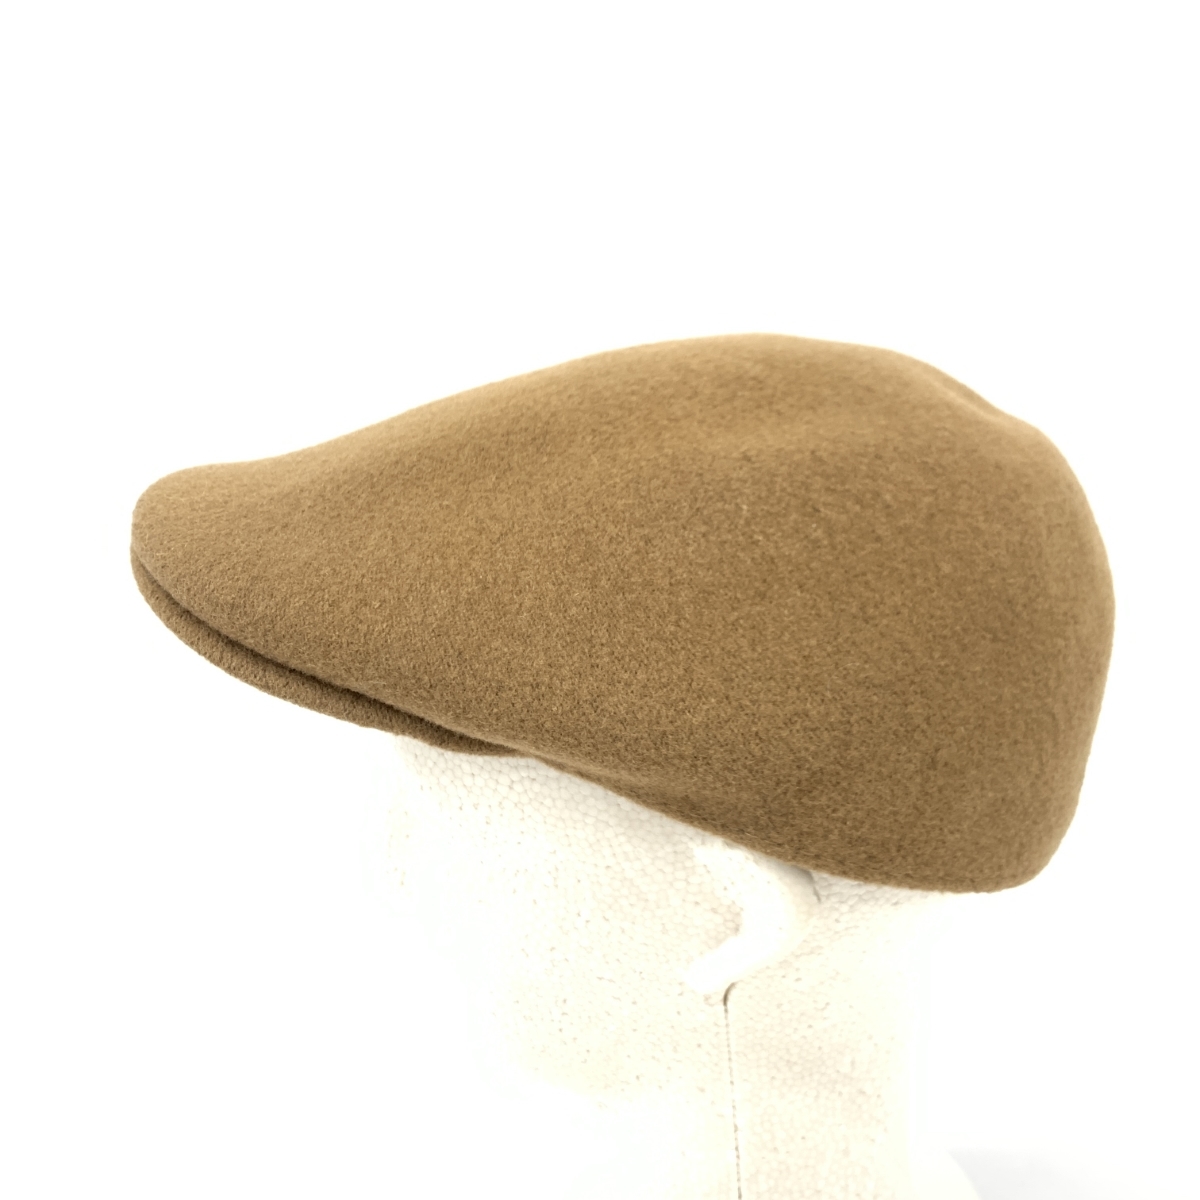  excellent *KANGOL Kangol hunting cap * Brown wool 70% men's hat hat hat clothing accessories 